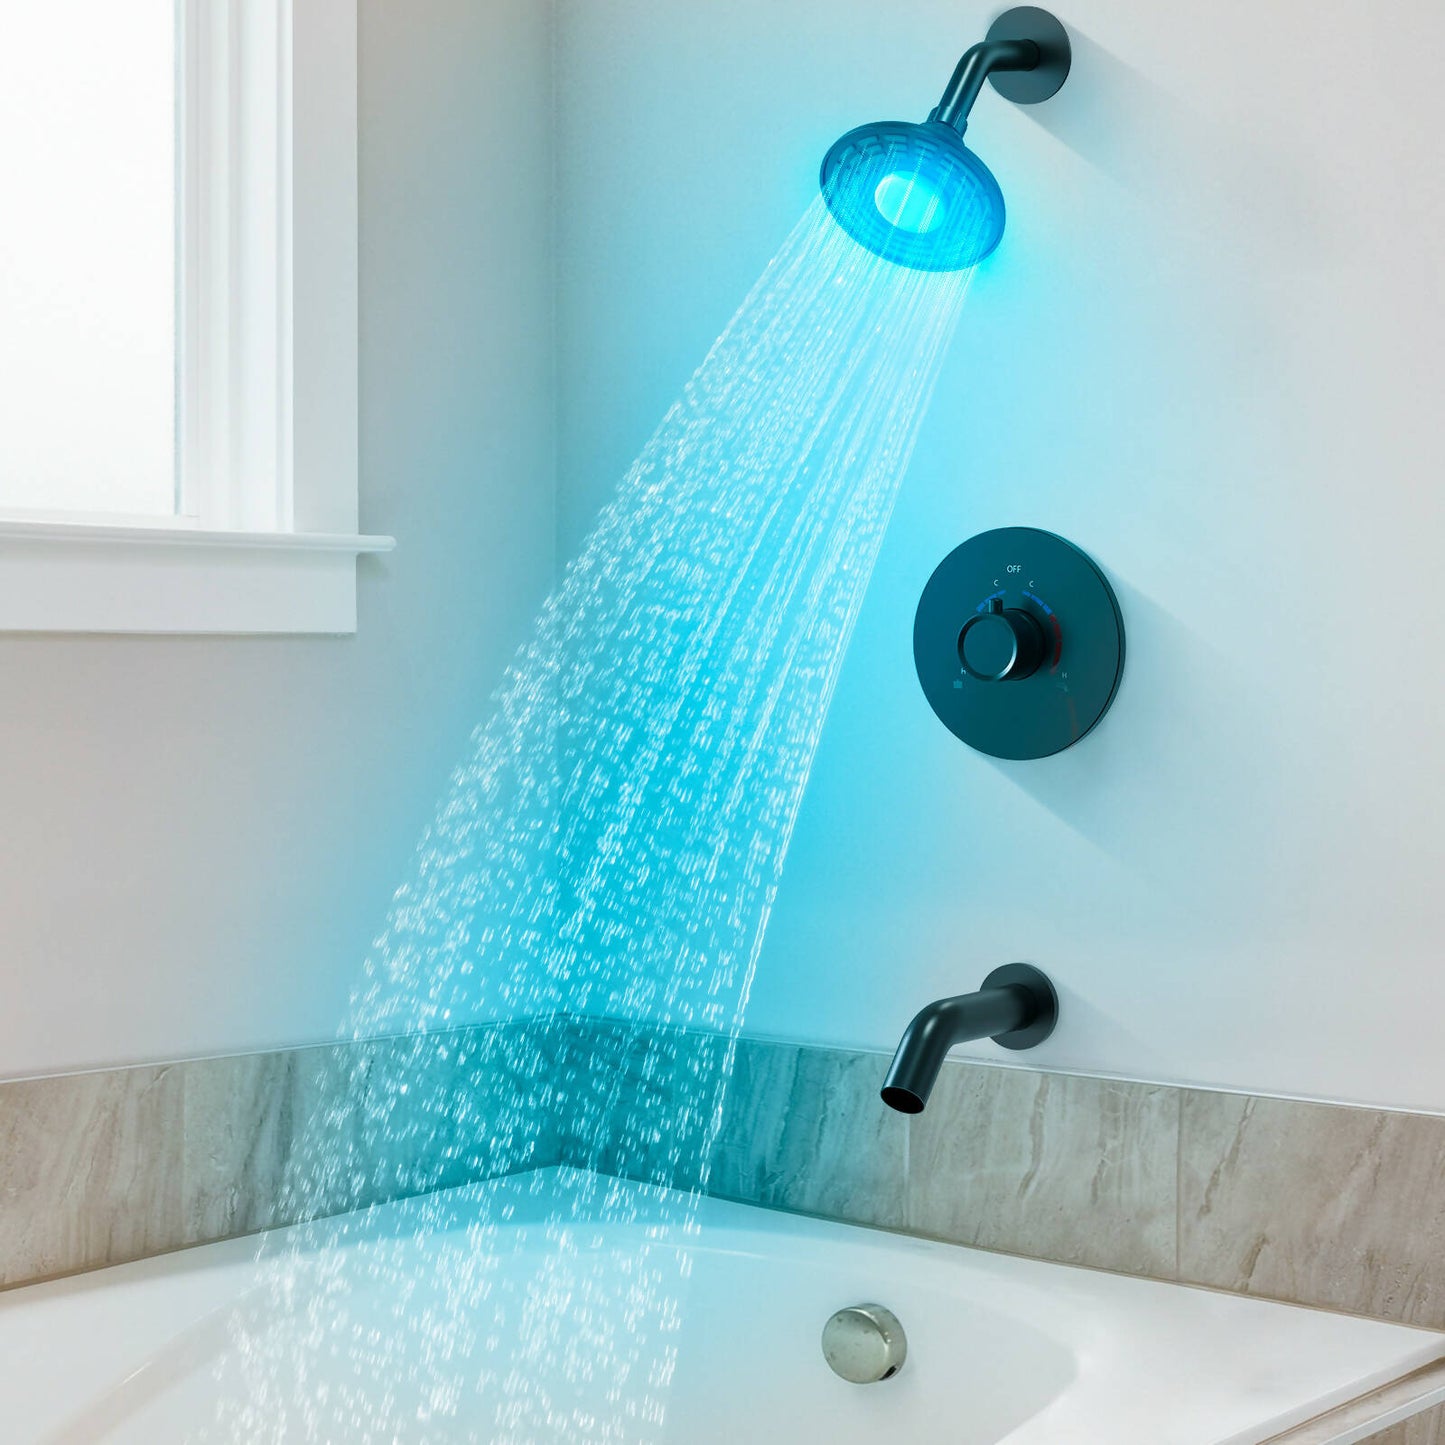 ThermaGlow Collection EVERSTEIN LED Shower Head Faucet Set with Rough-in Valve